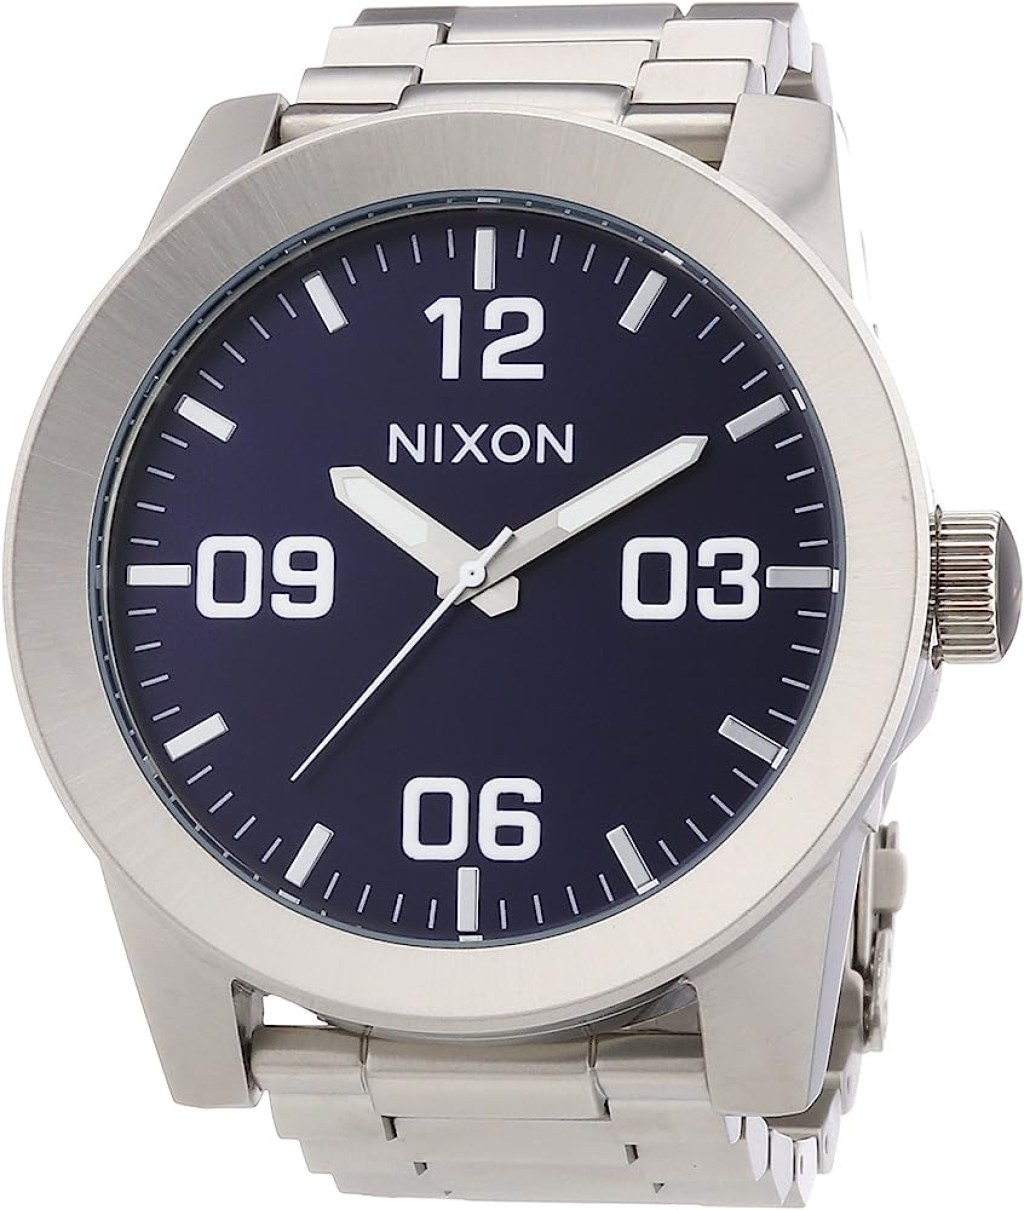 Picture of: Nixon Men’s Quartz Watch Corporal SS A- with Metal